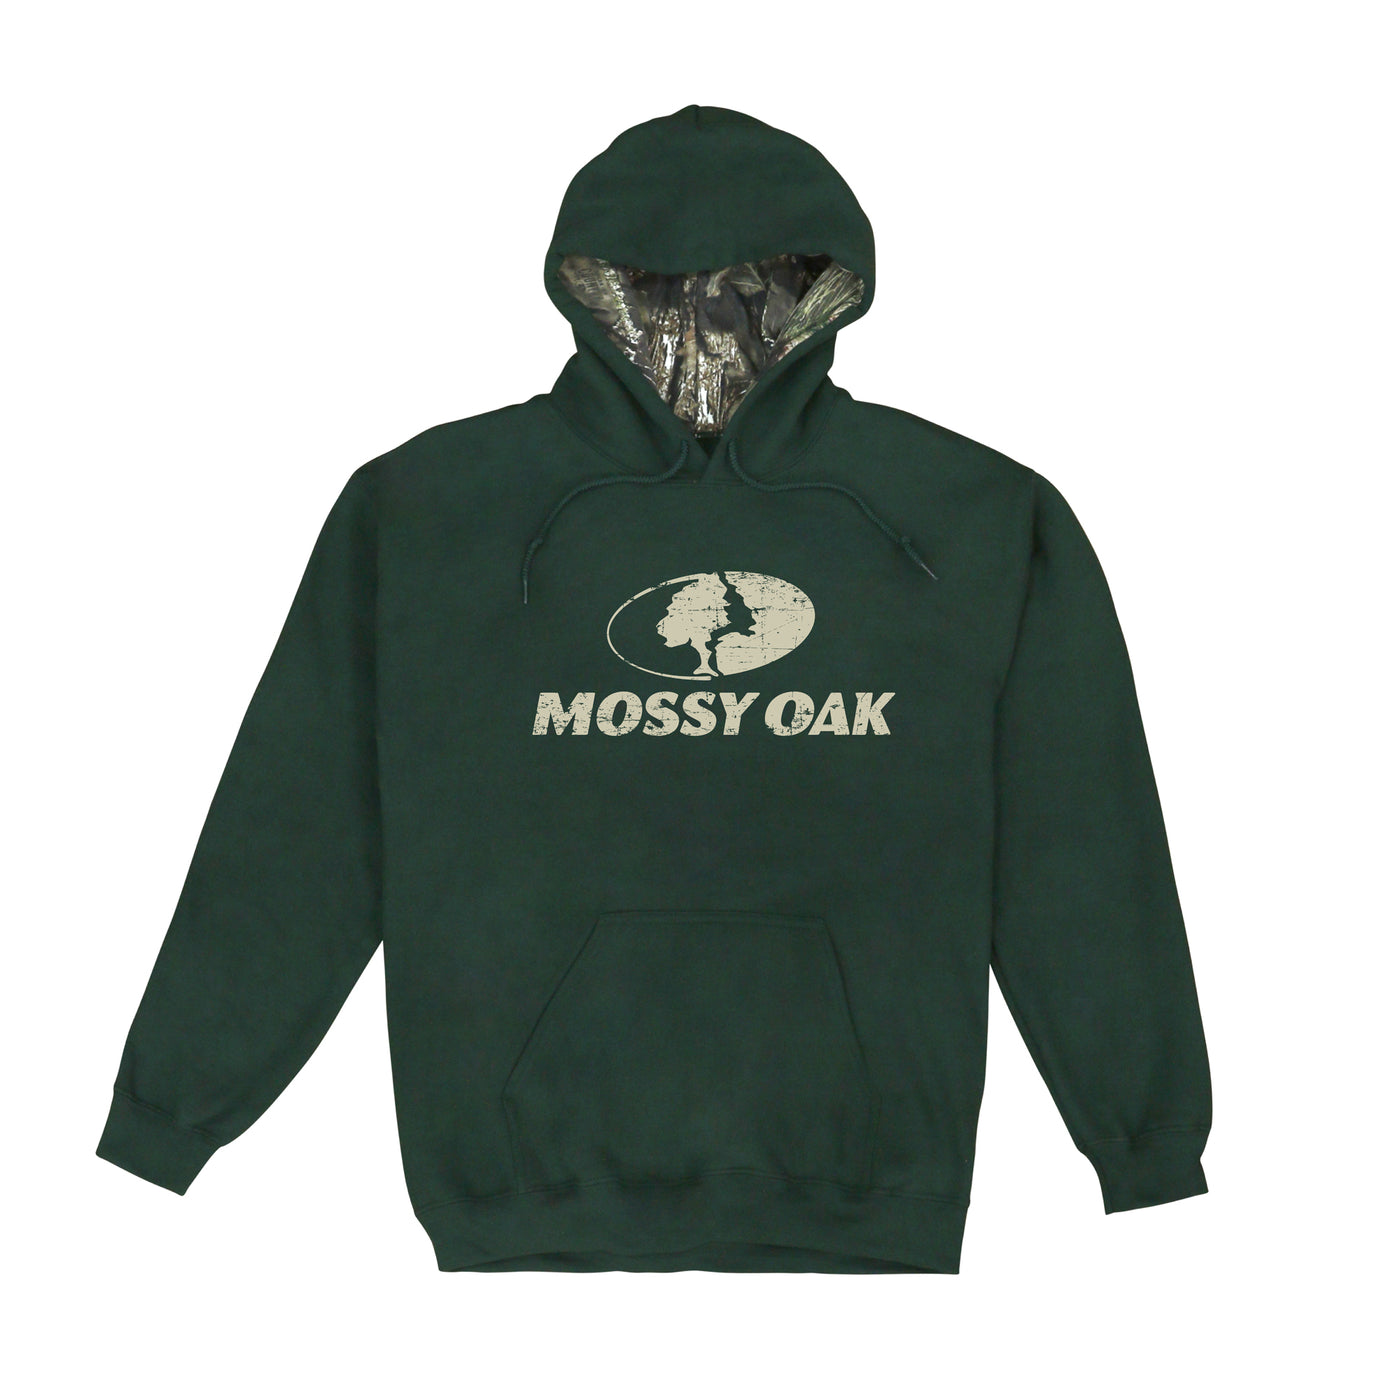 Mossy Oak Hoodie Pullover Adult Size M Camo Outdoor Hunting Fishing  Logo.